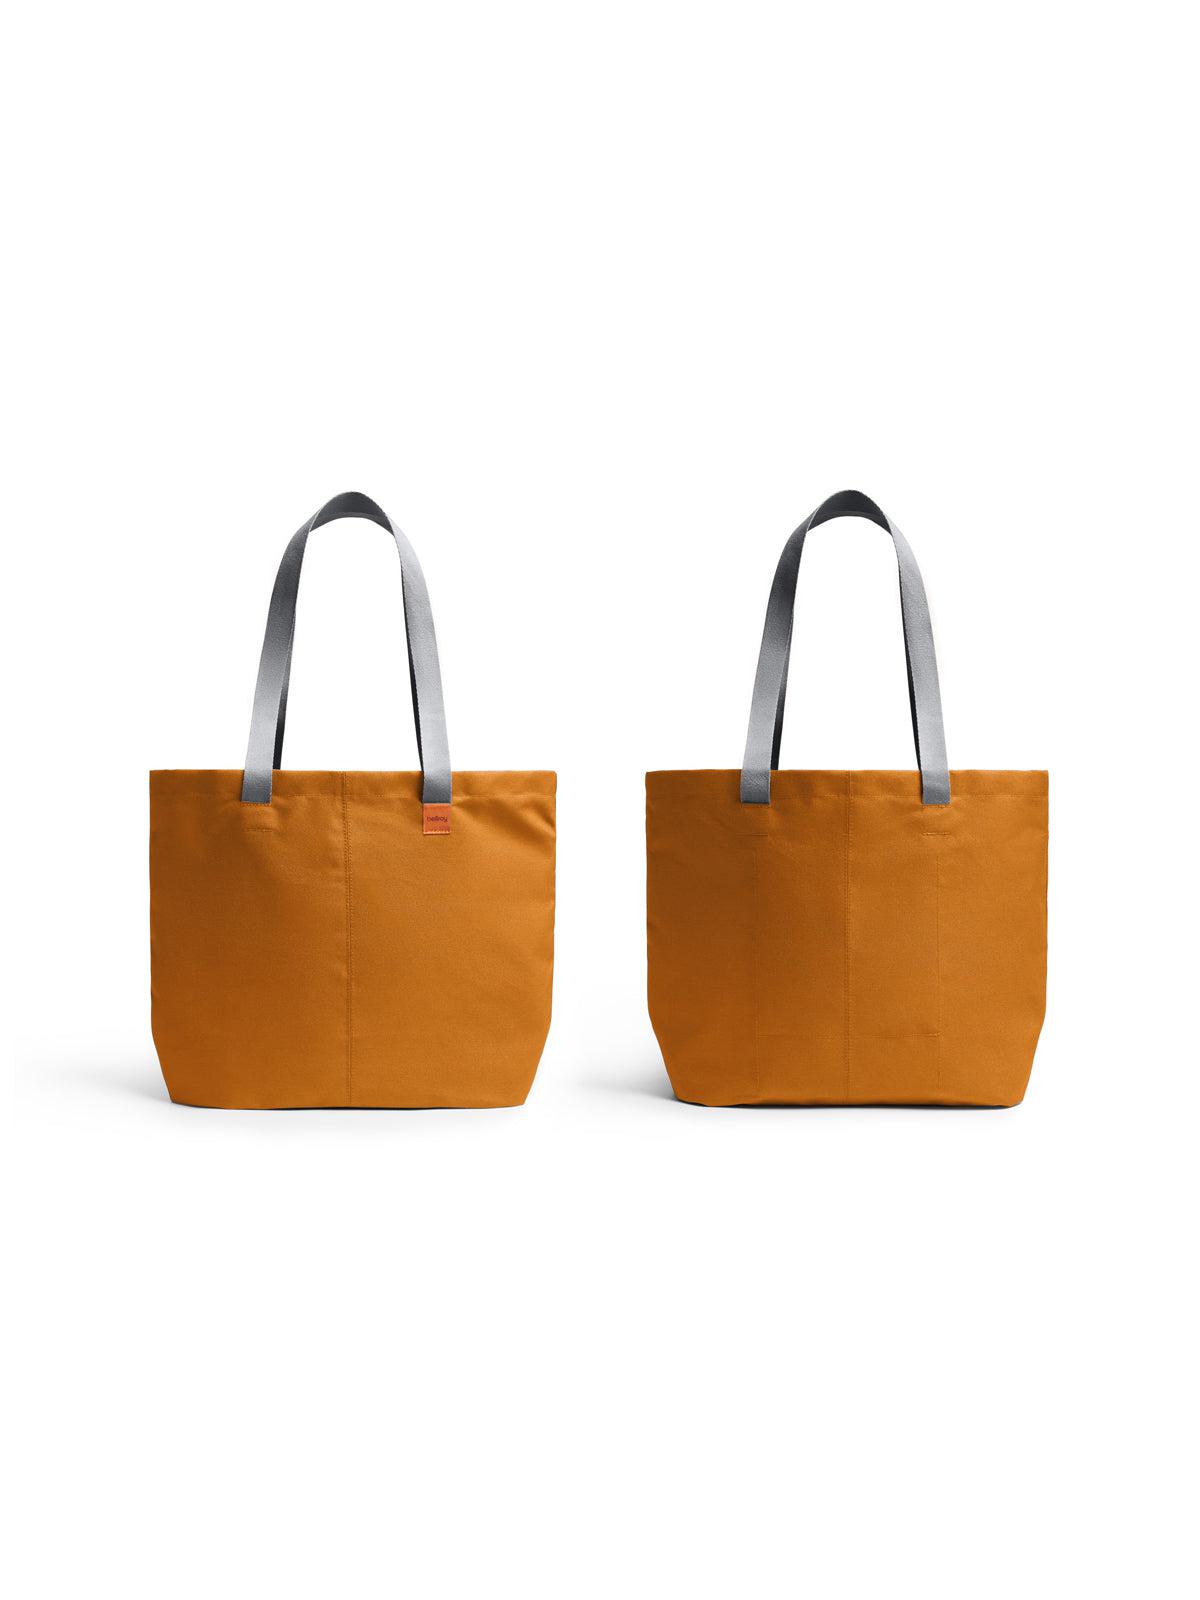 Bellroy Market Tote Biscuit (Leather-free)